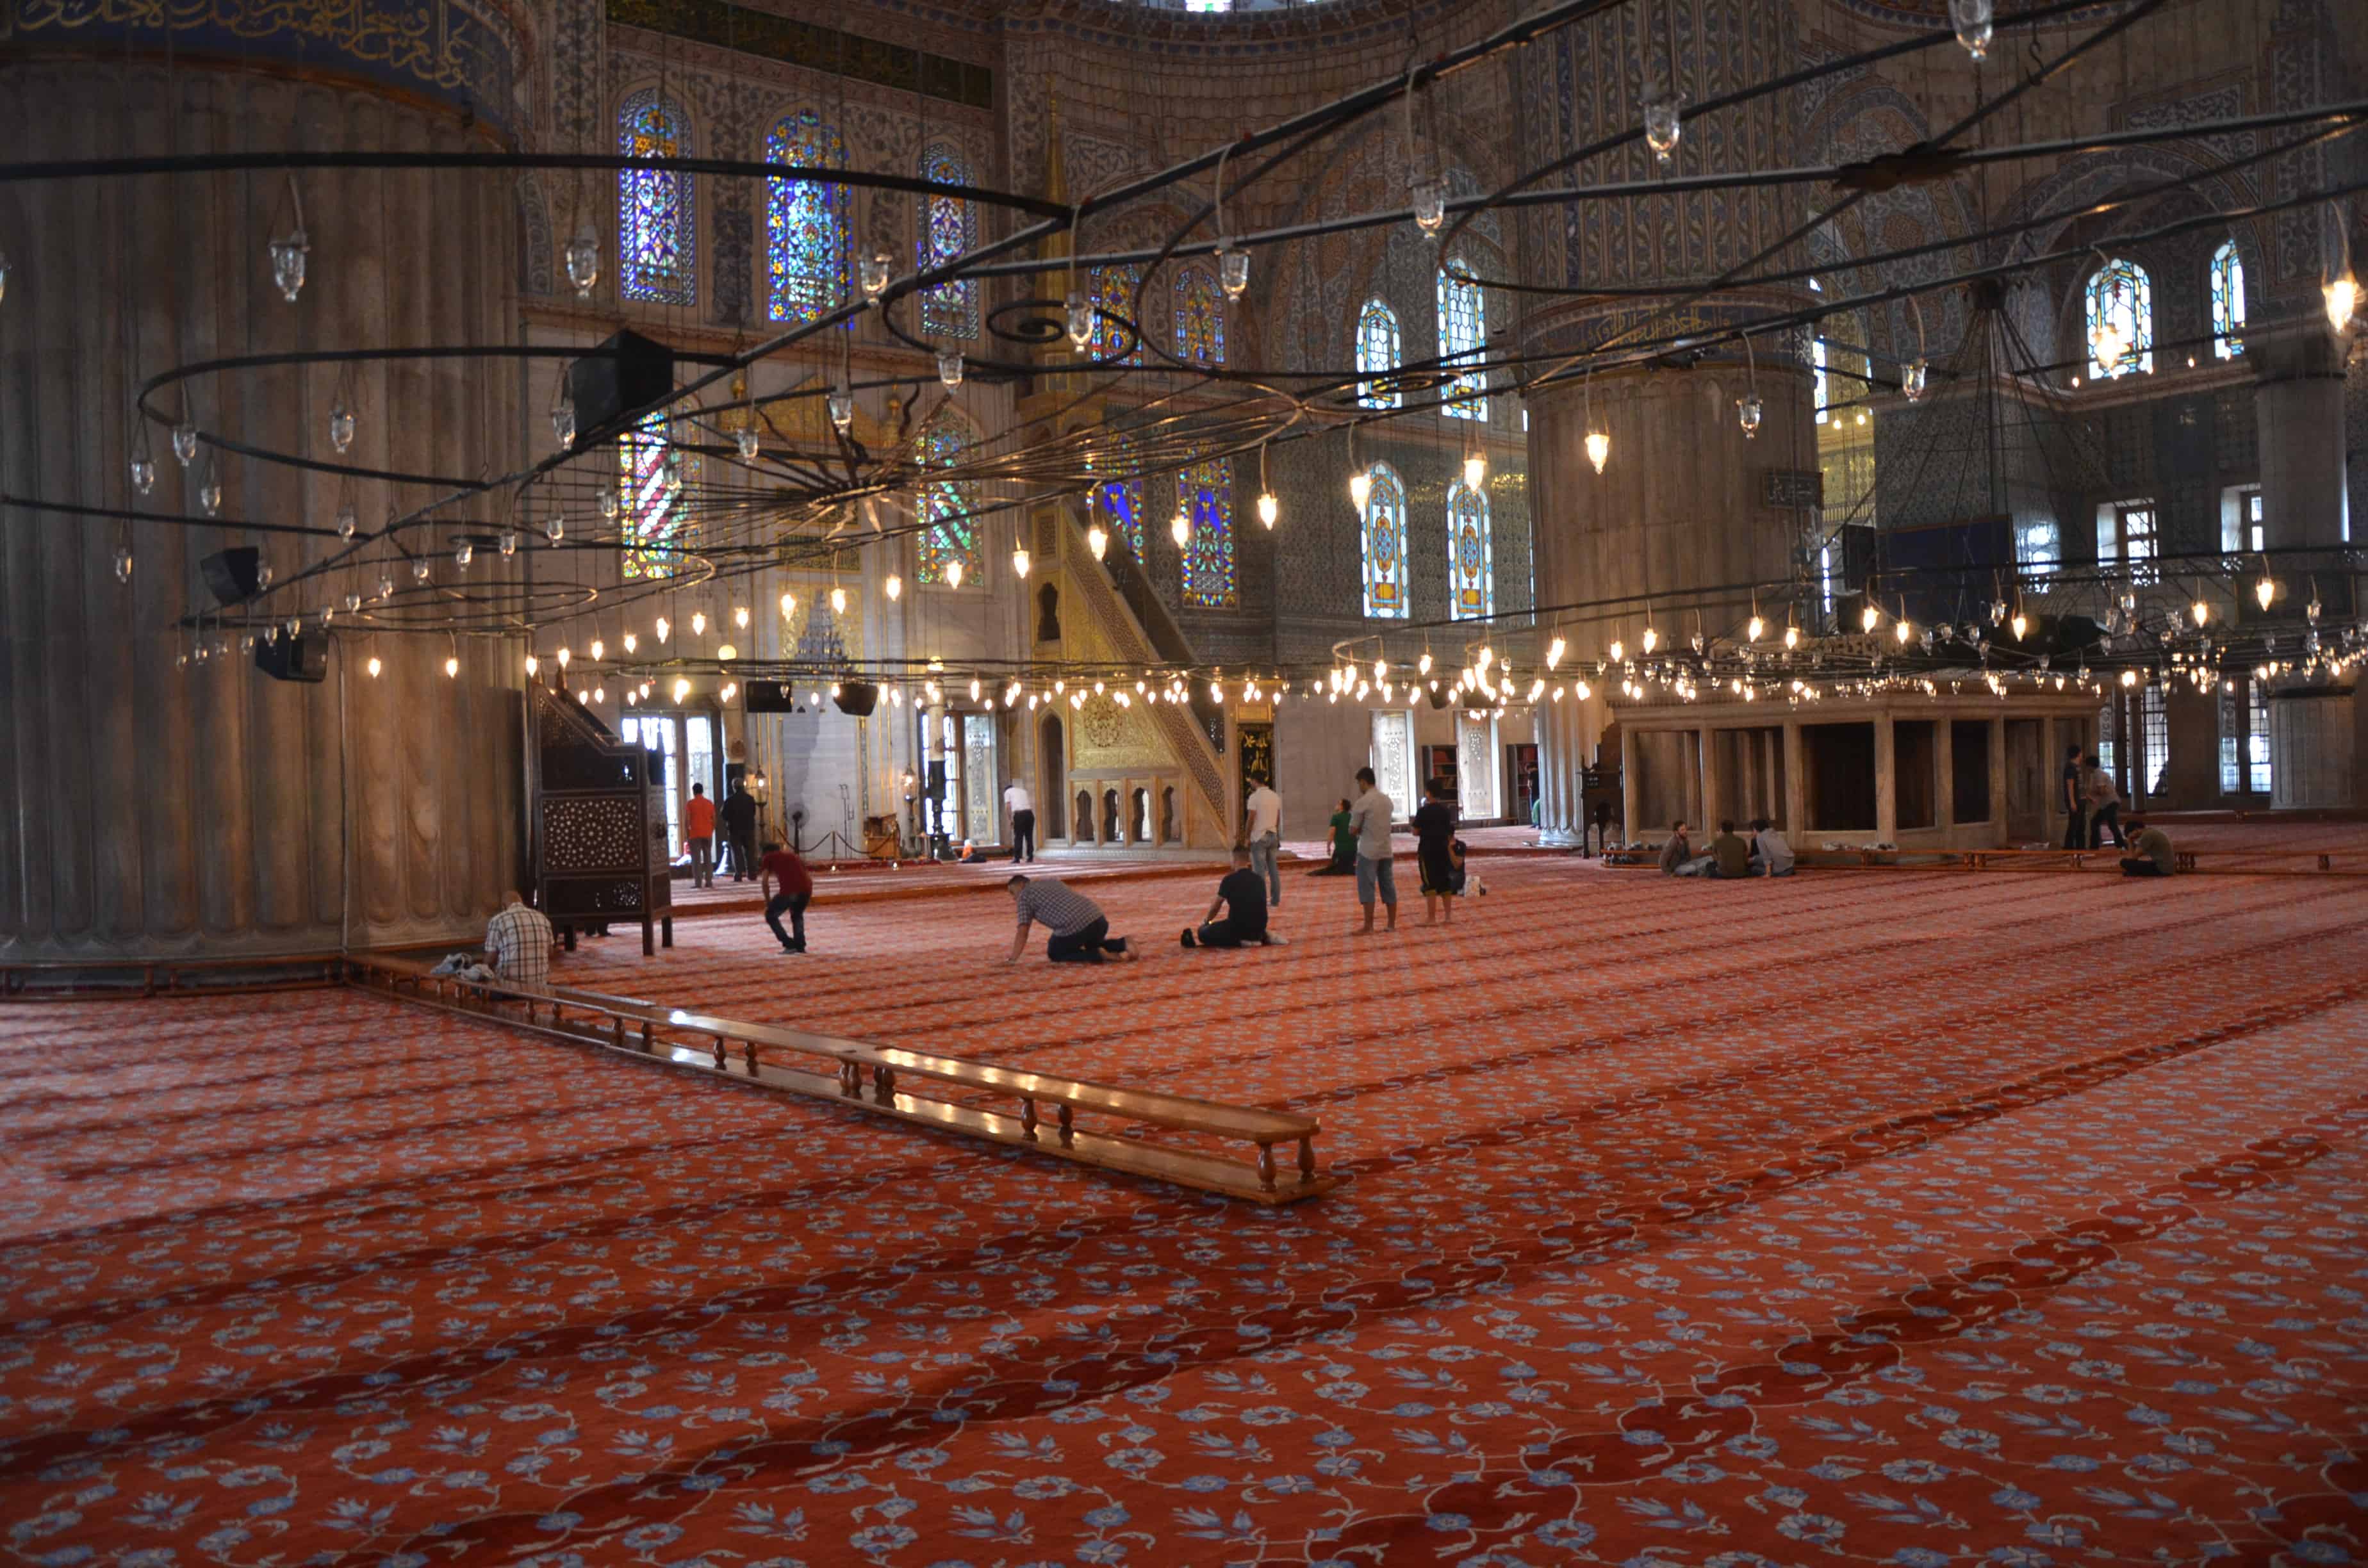 Prayer hall of the Sultan Ahmet Camii (Blue Mosque) in Fatih, Istanbul, Turkey